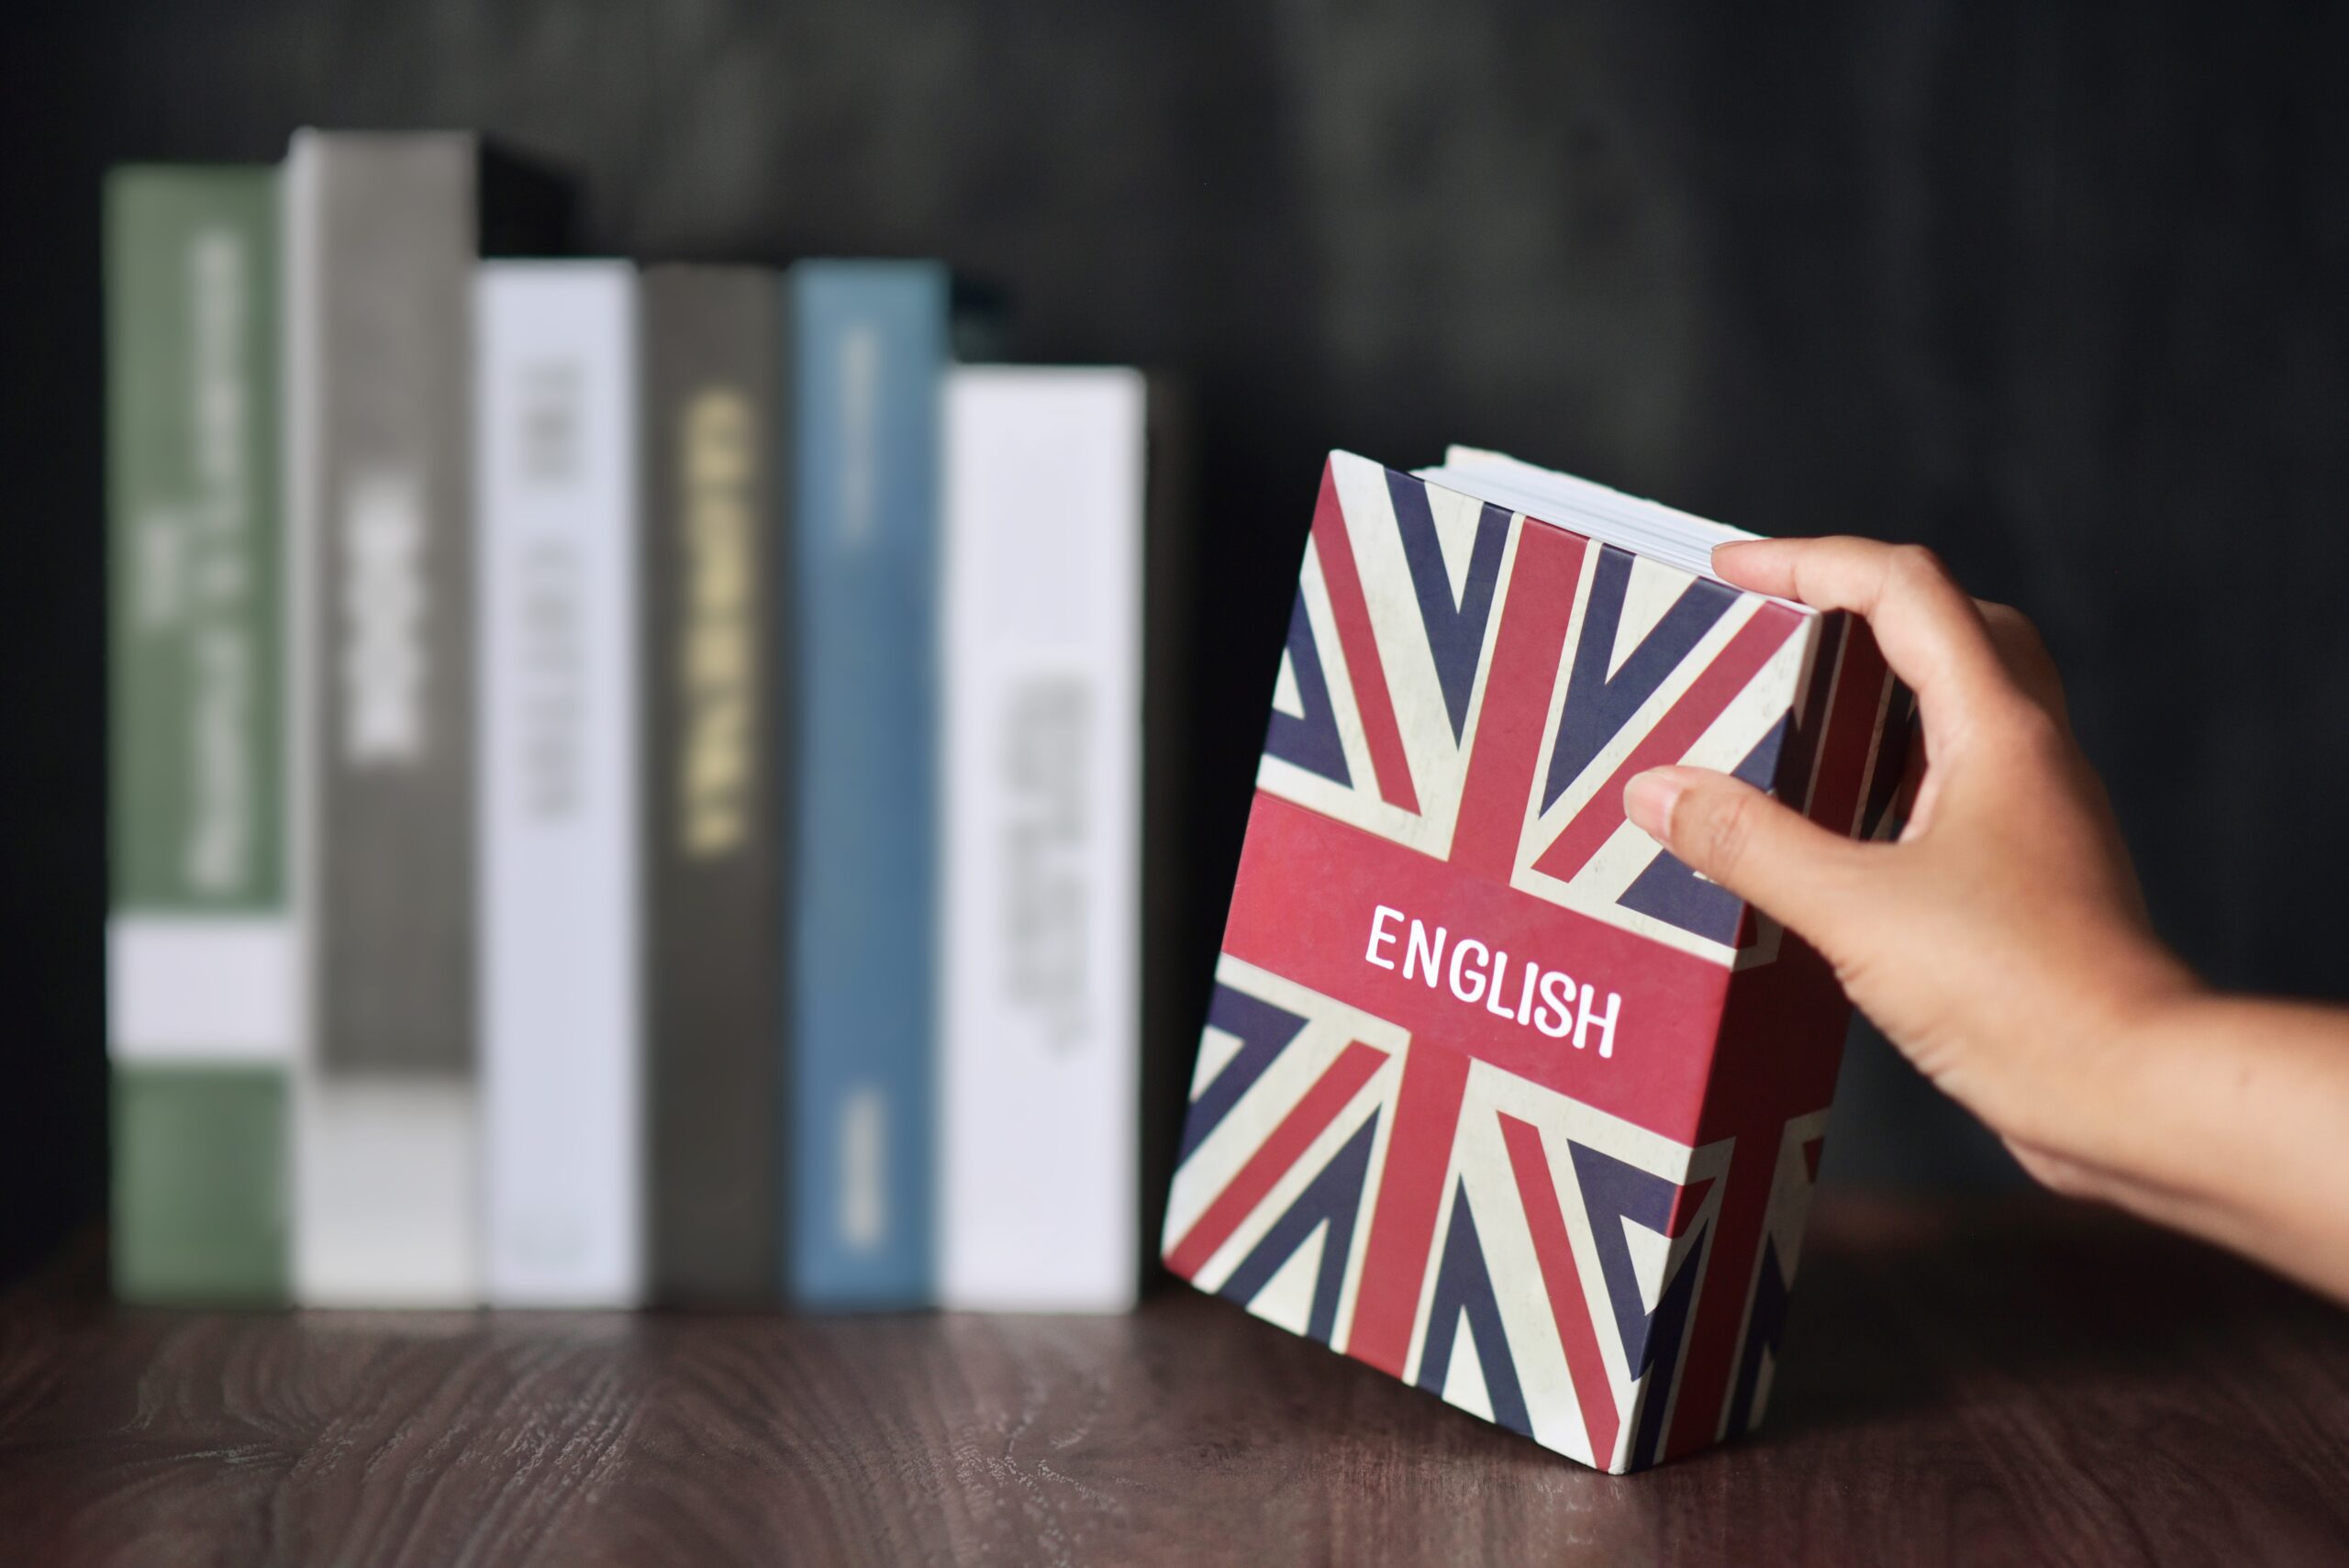 English,Book,Is,Selected,From,The,Bookshelf.,Learning,English,Fluently